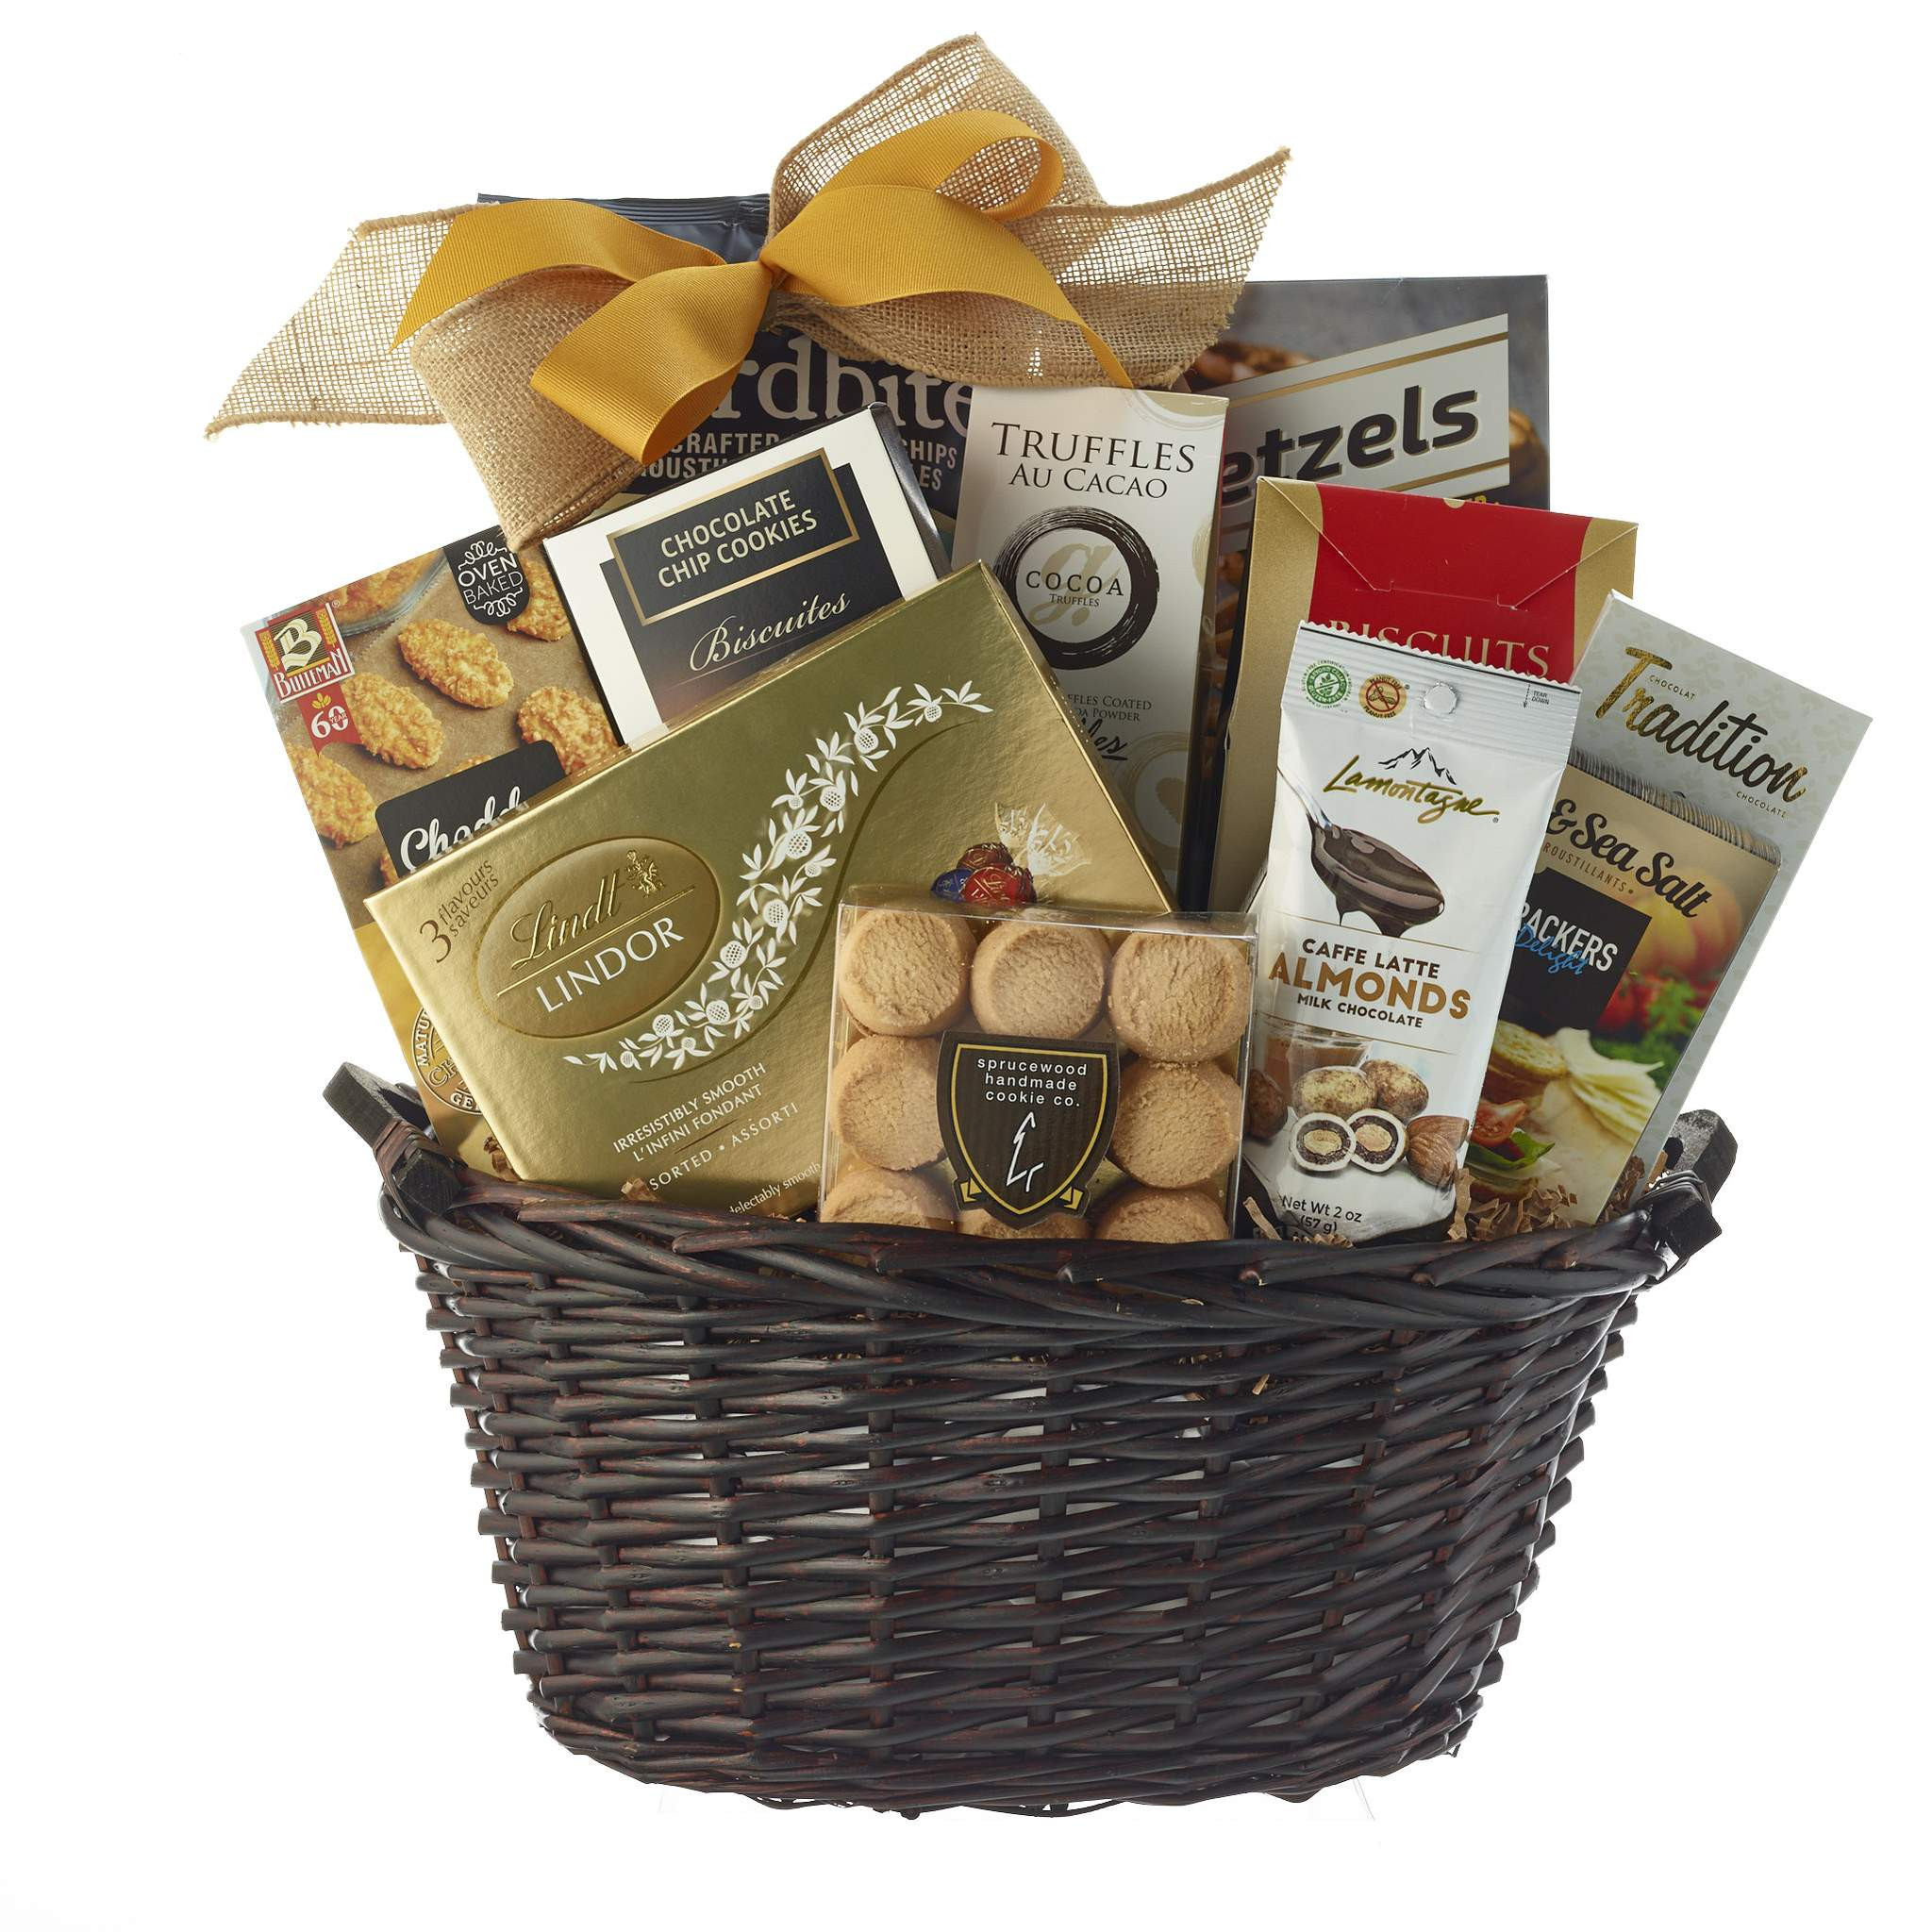 Dad Gift Basket Ideas
 Father s Day Gift Basket Ideas